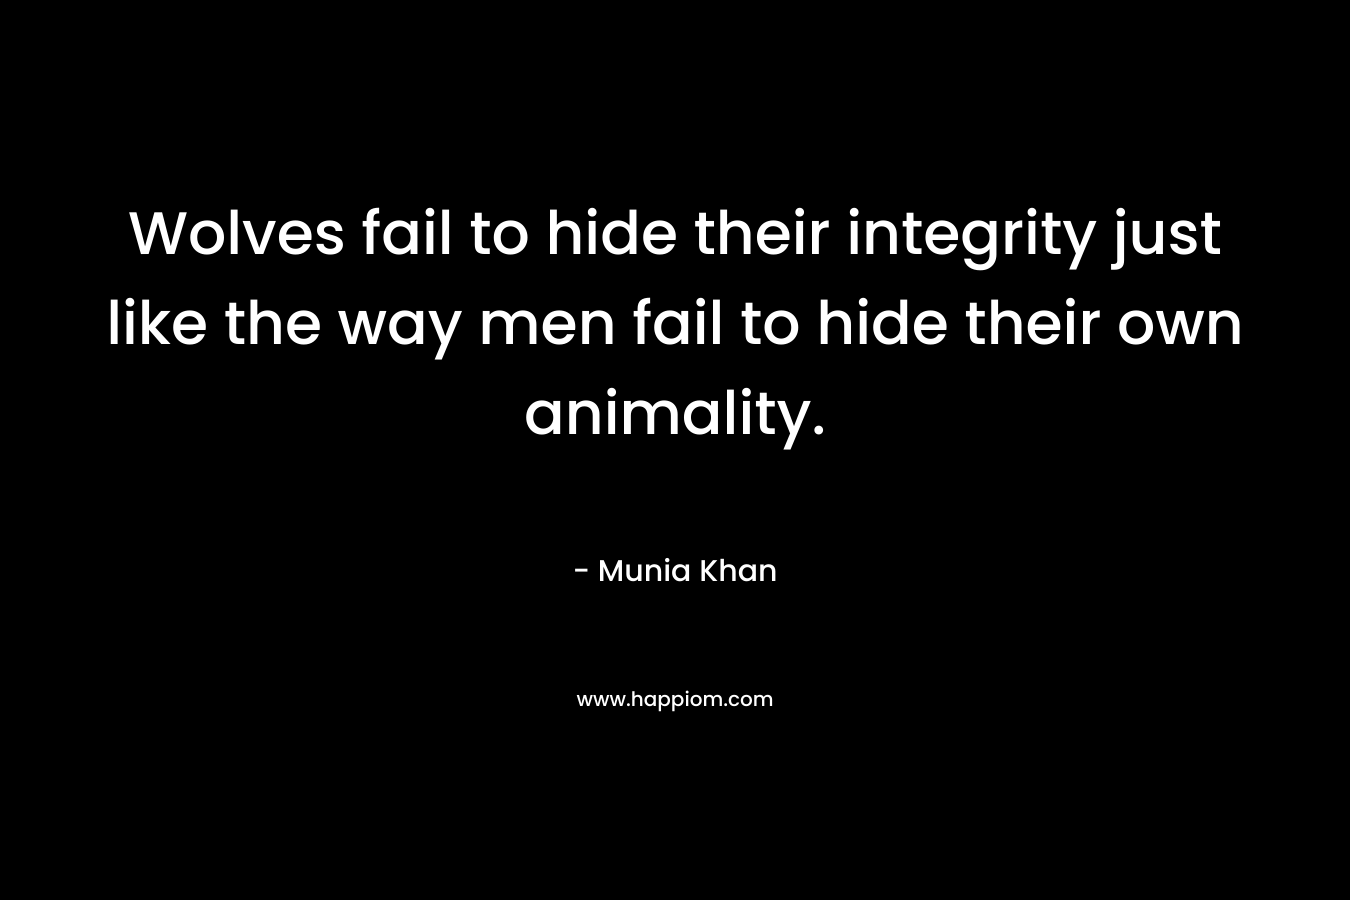 Wolves fail to hide their integrity just like the way men fail to hide their own animality.